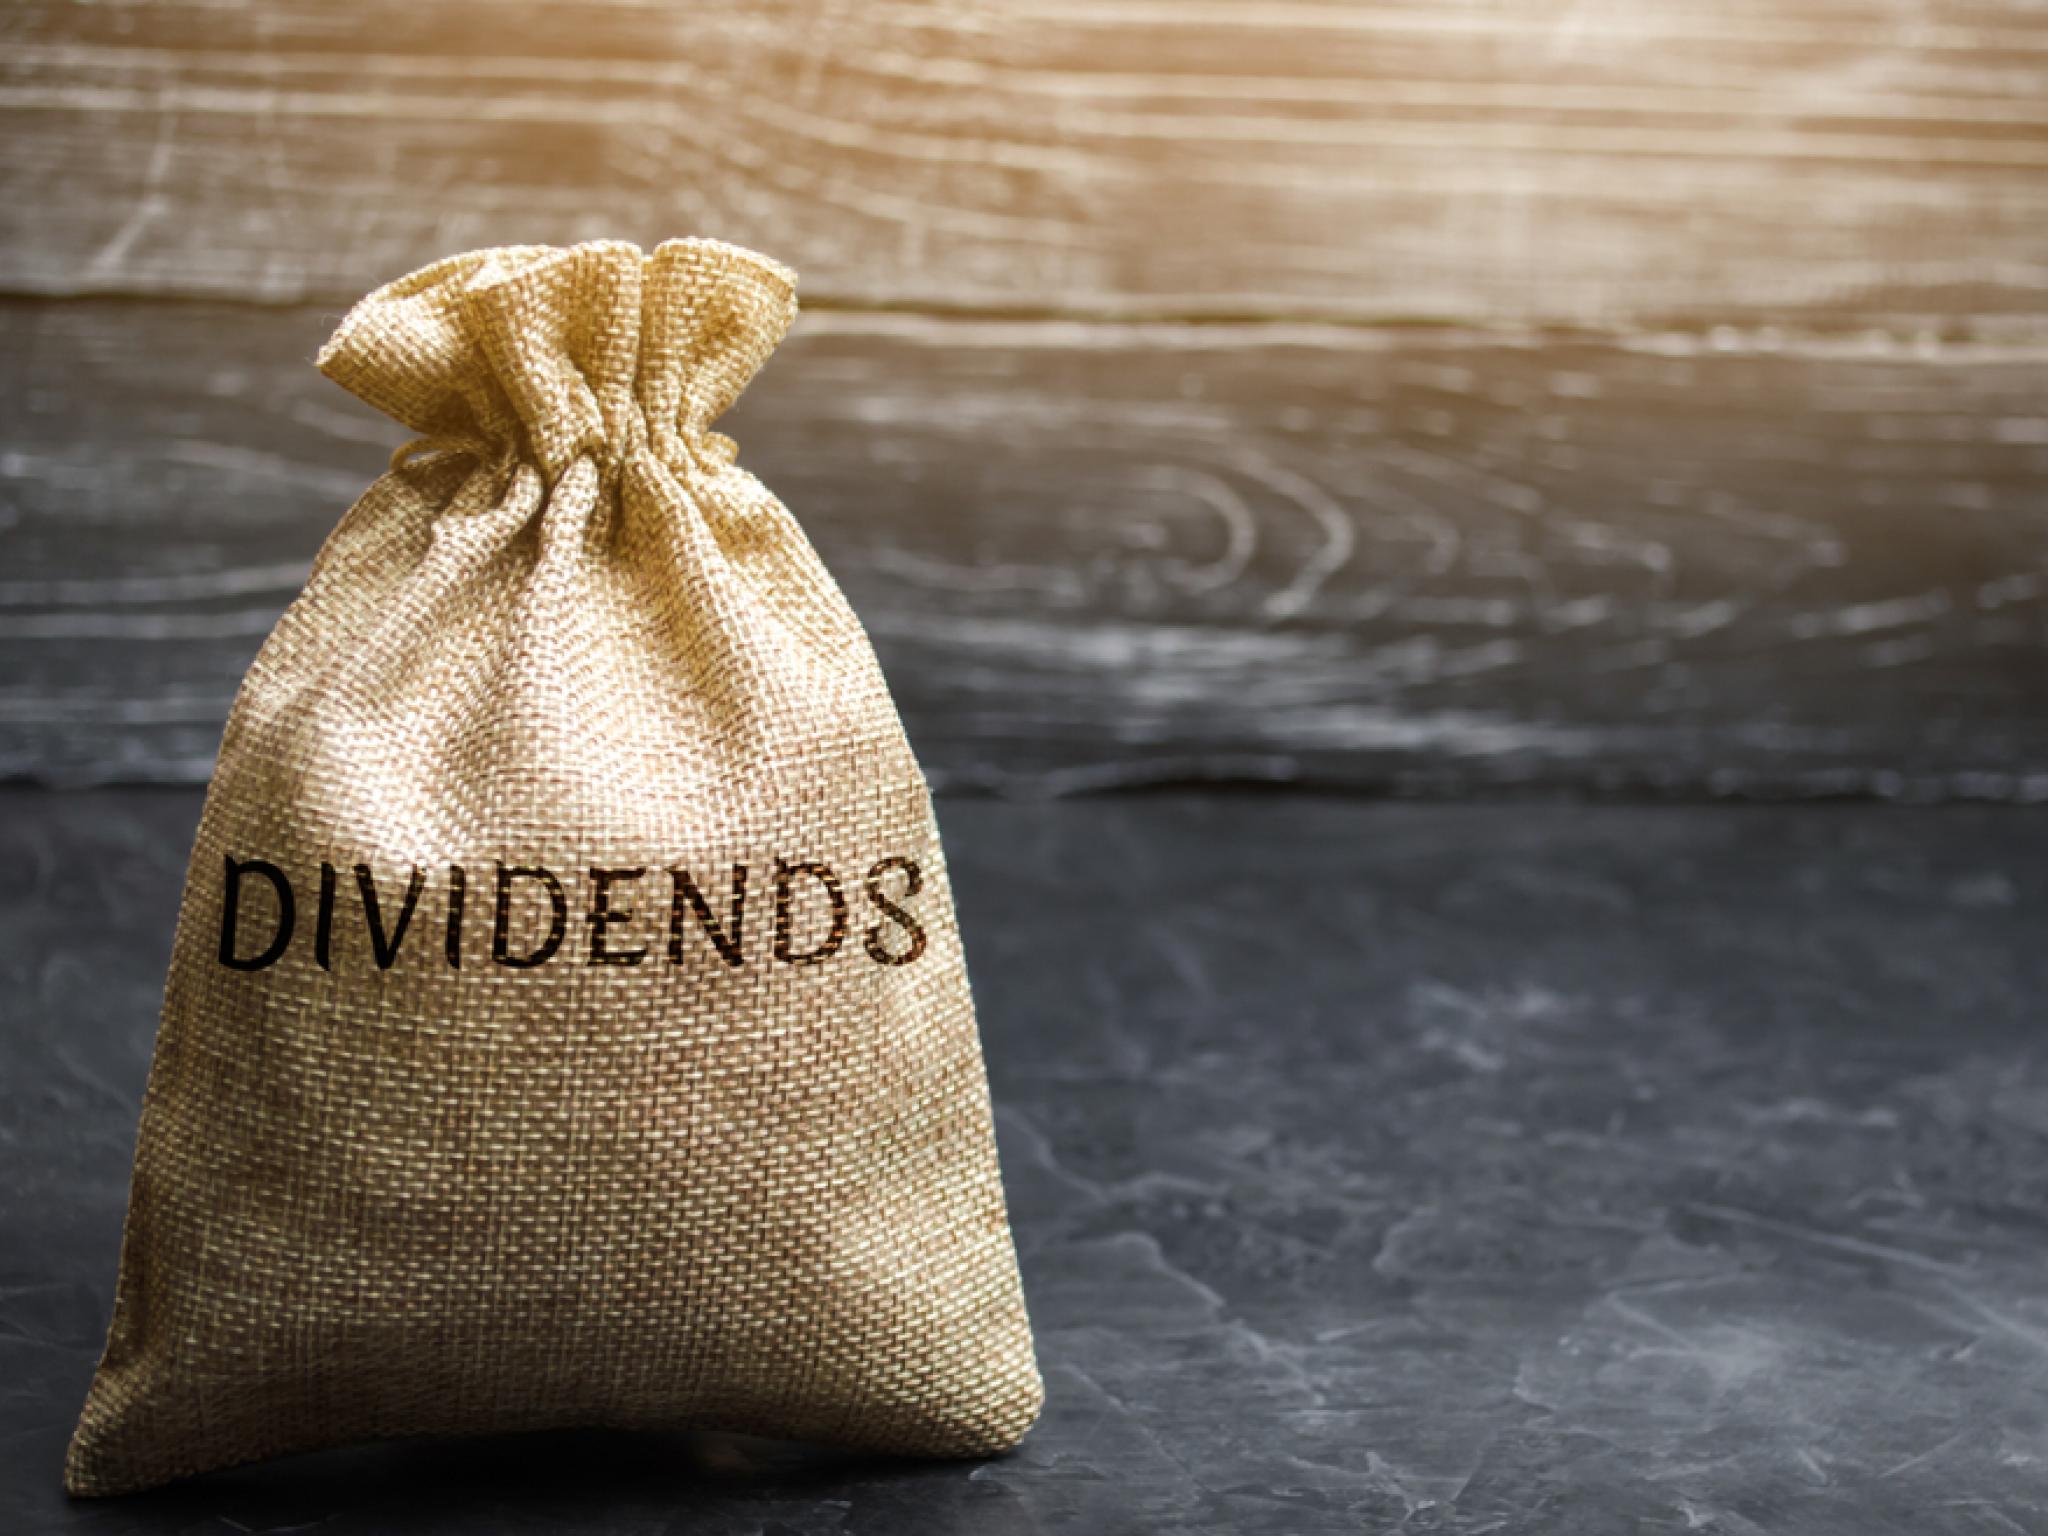  3-reits-with-upcoming-earnings-reports-that-just-raised-dividends 